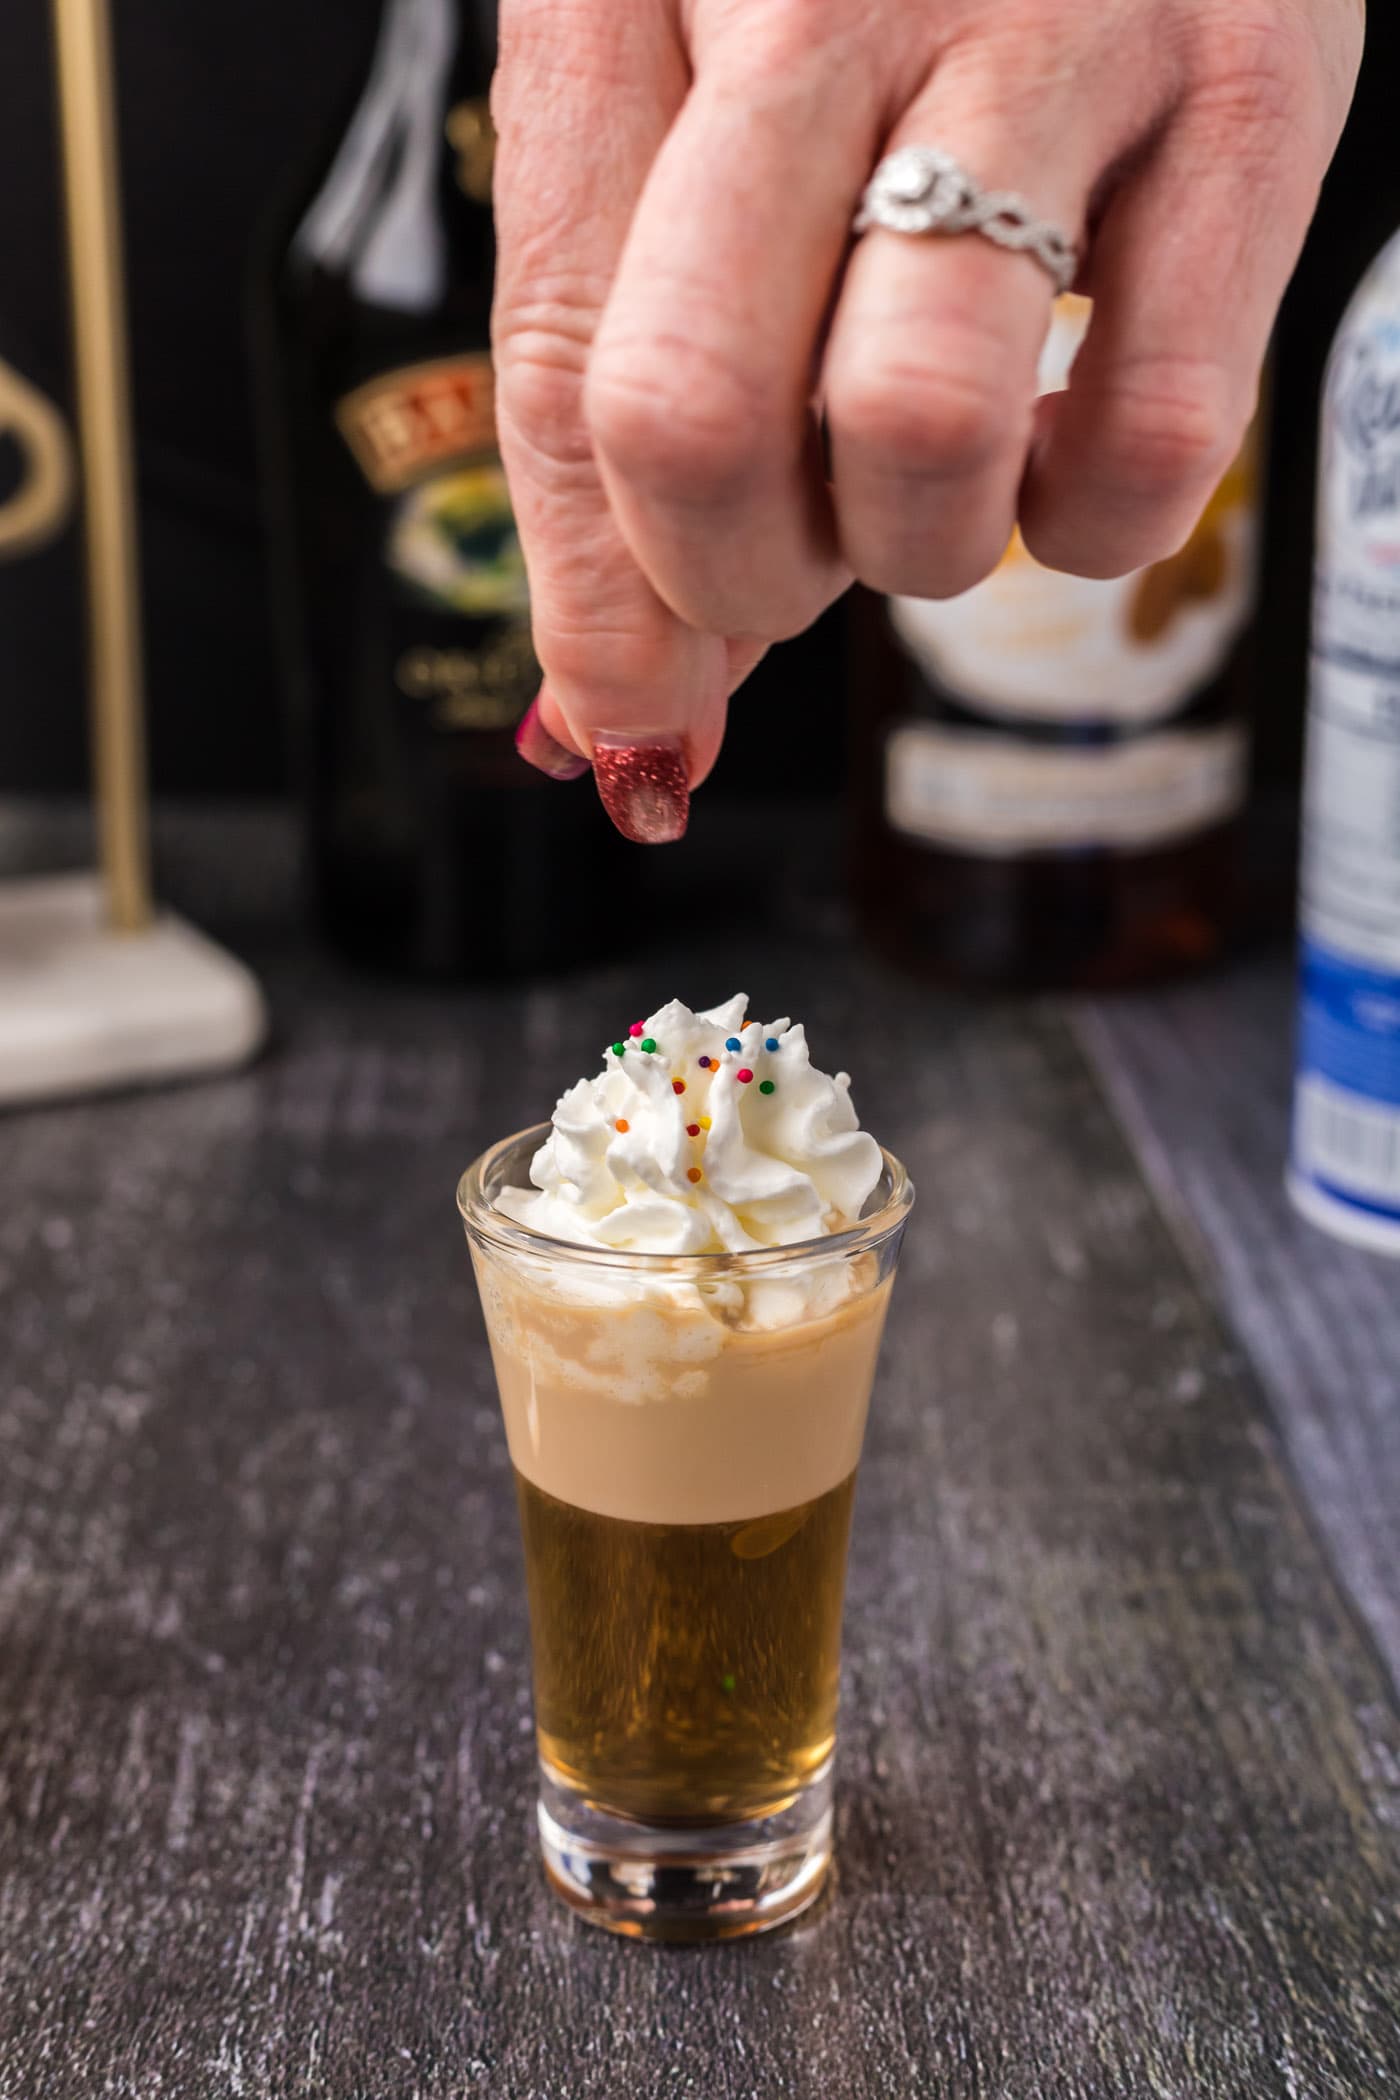 adding sprinkles on top of whipped cream garnish on buttery nipple shot